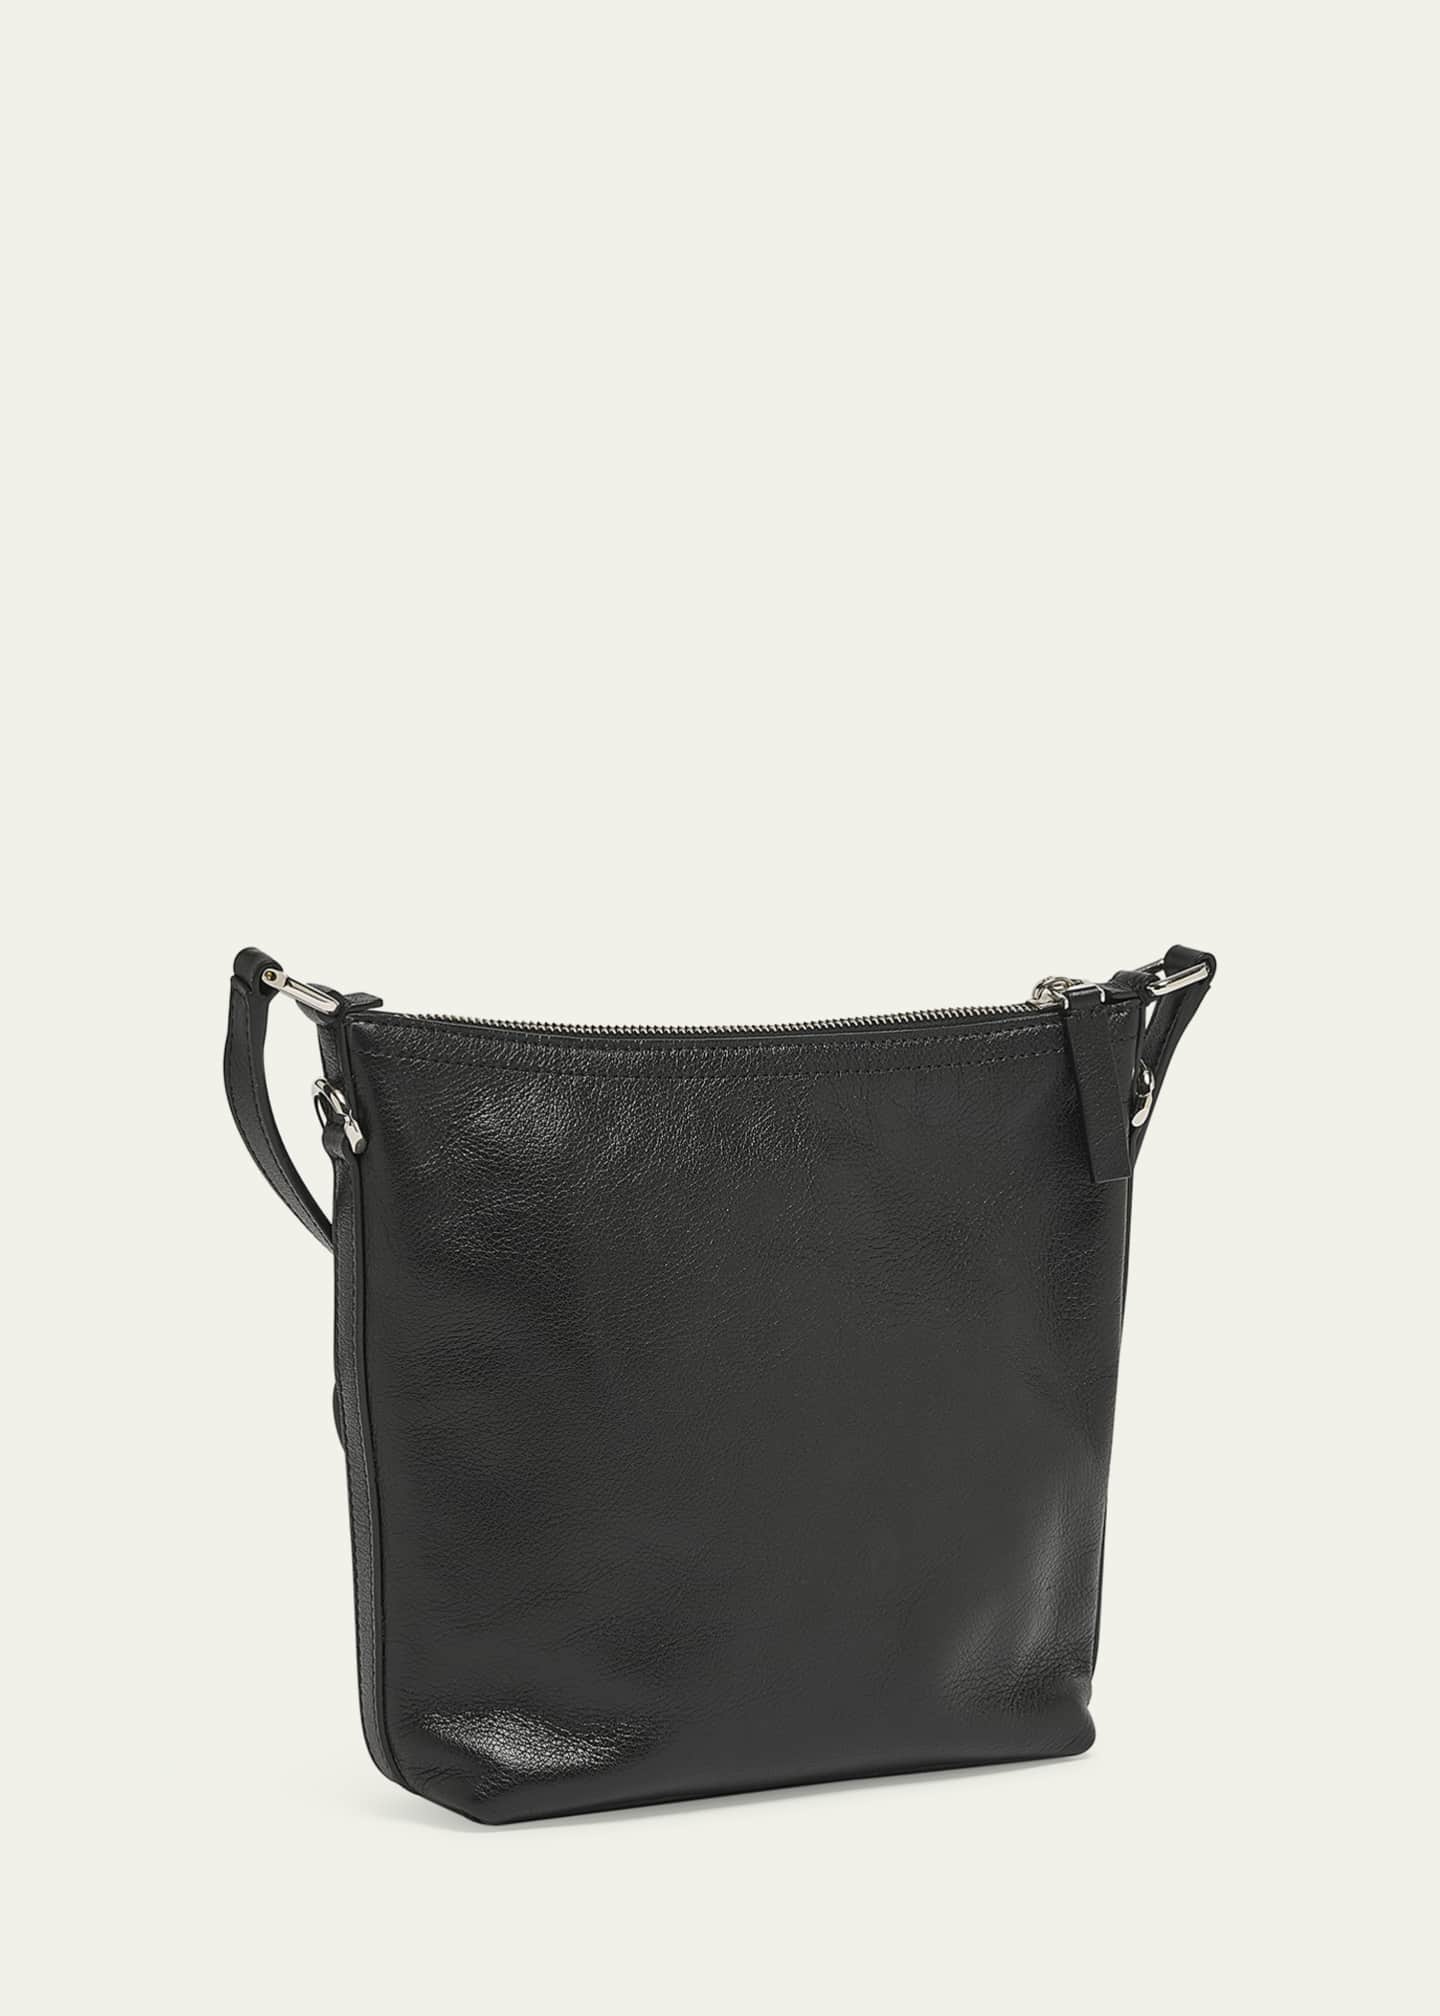 Givenchy Men's Voyou Small Leather Crossbody Bag - Bergdorf Goodman